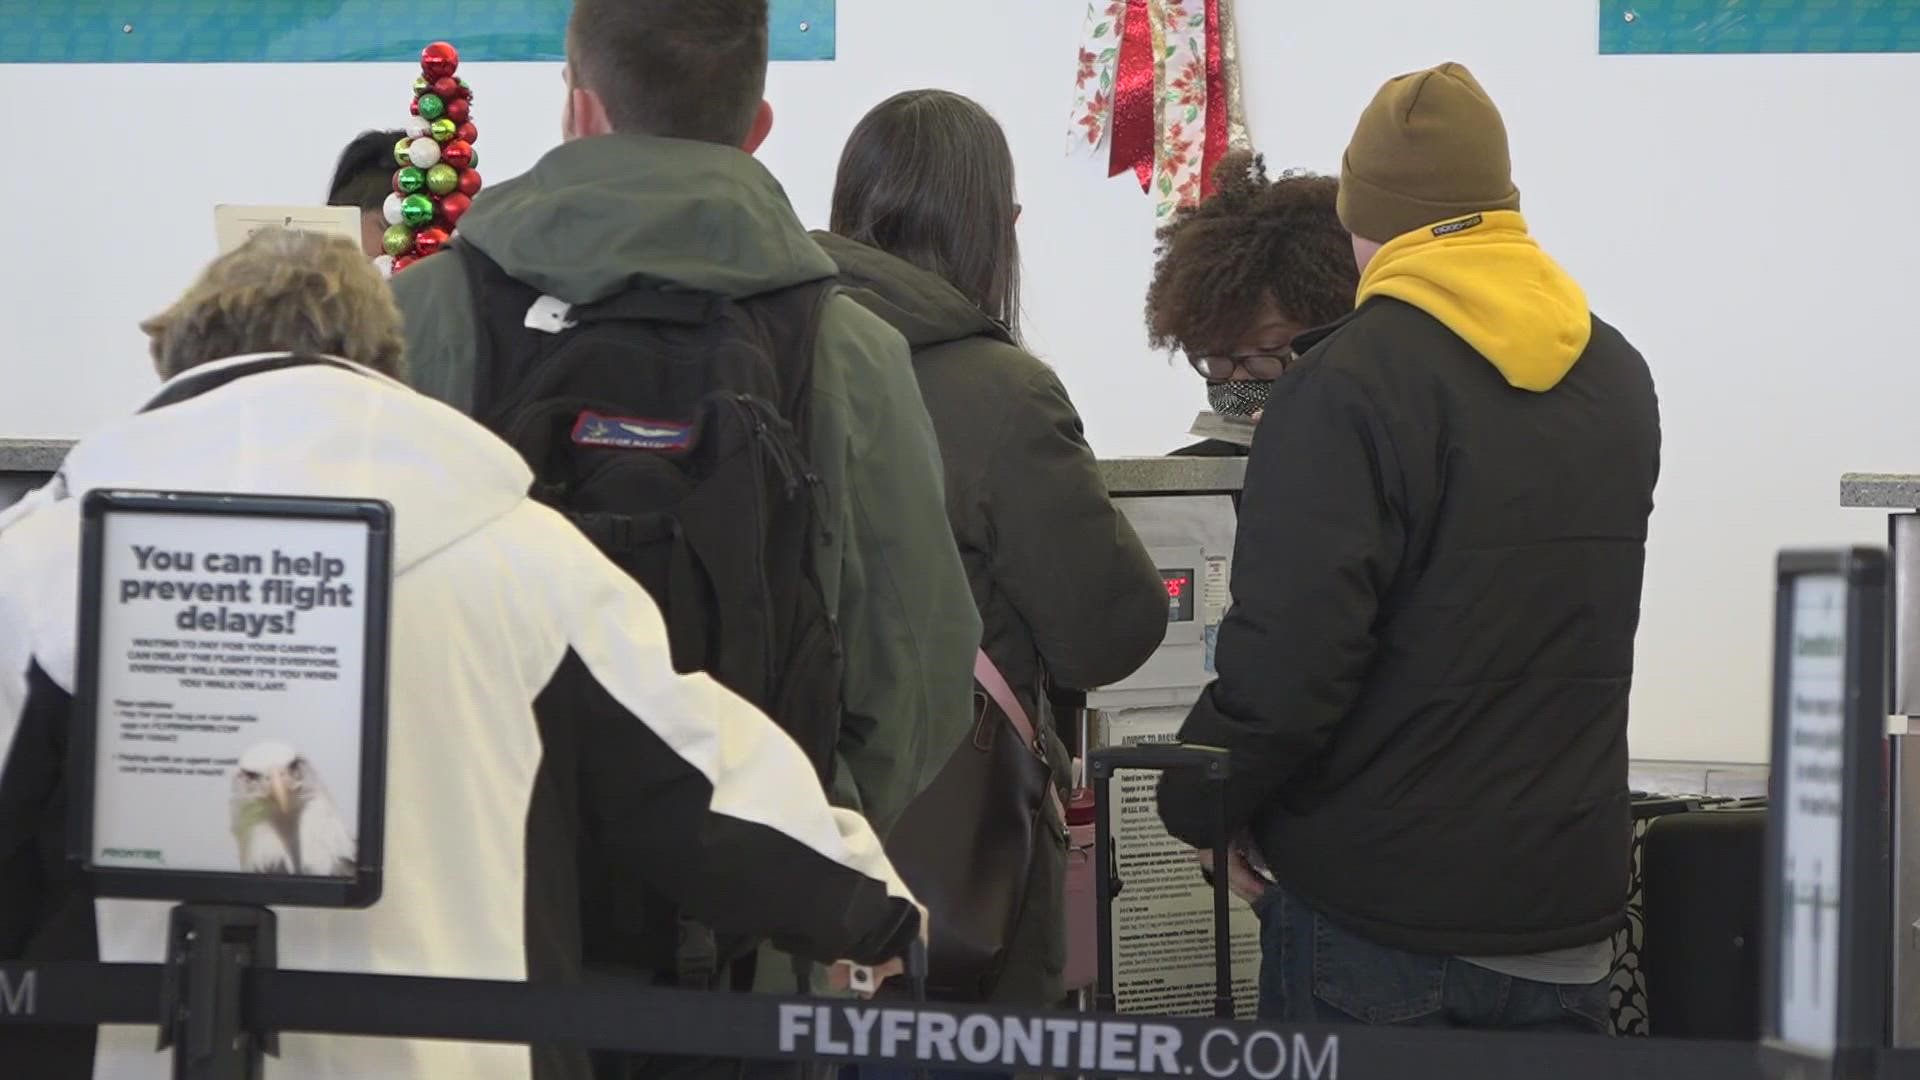 If you're planning to fly into or out of St. Louis Lambert International Airport, you might encounter a flight delay or cancelation due to severe winter weather.